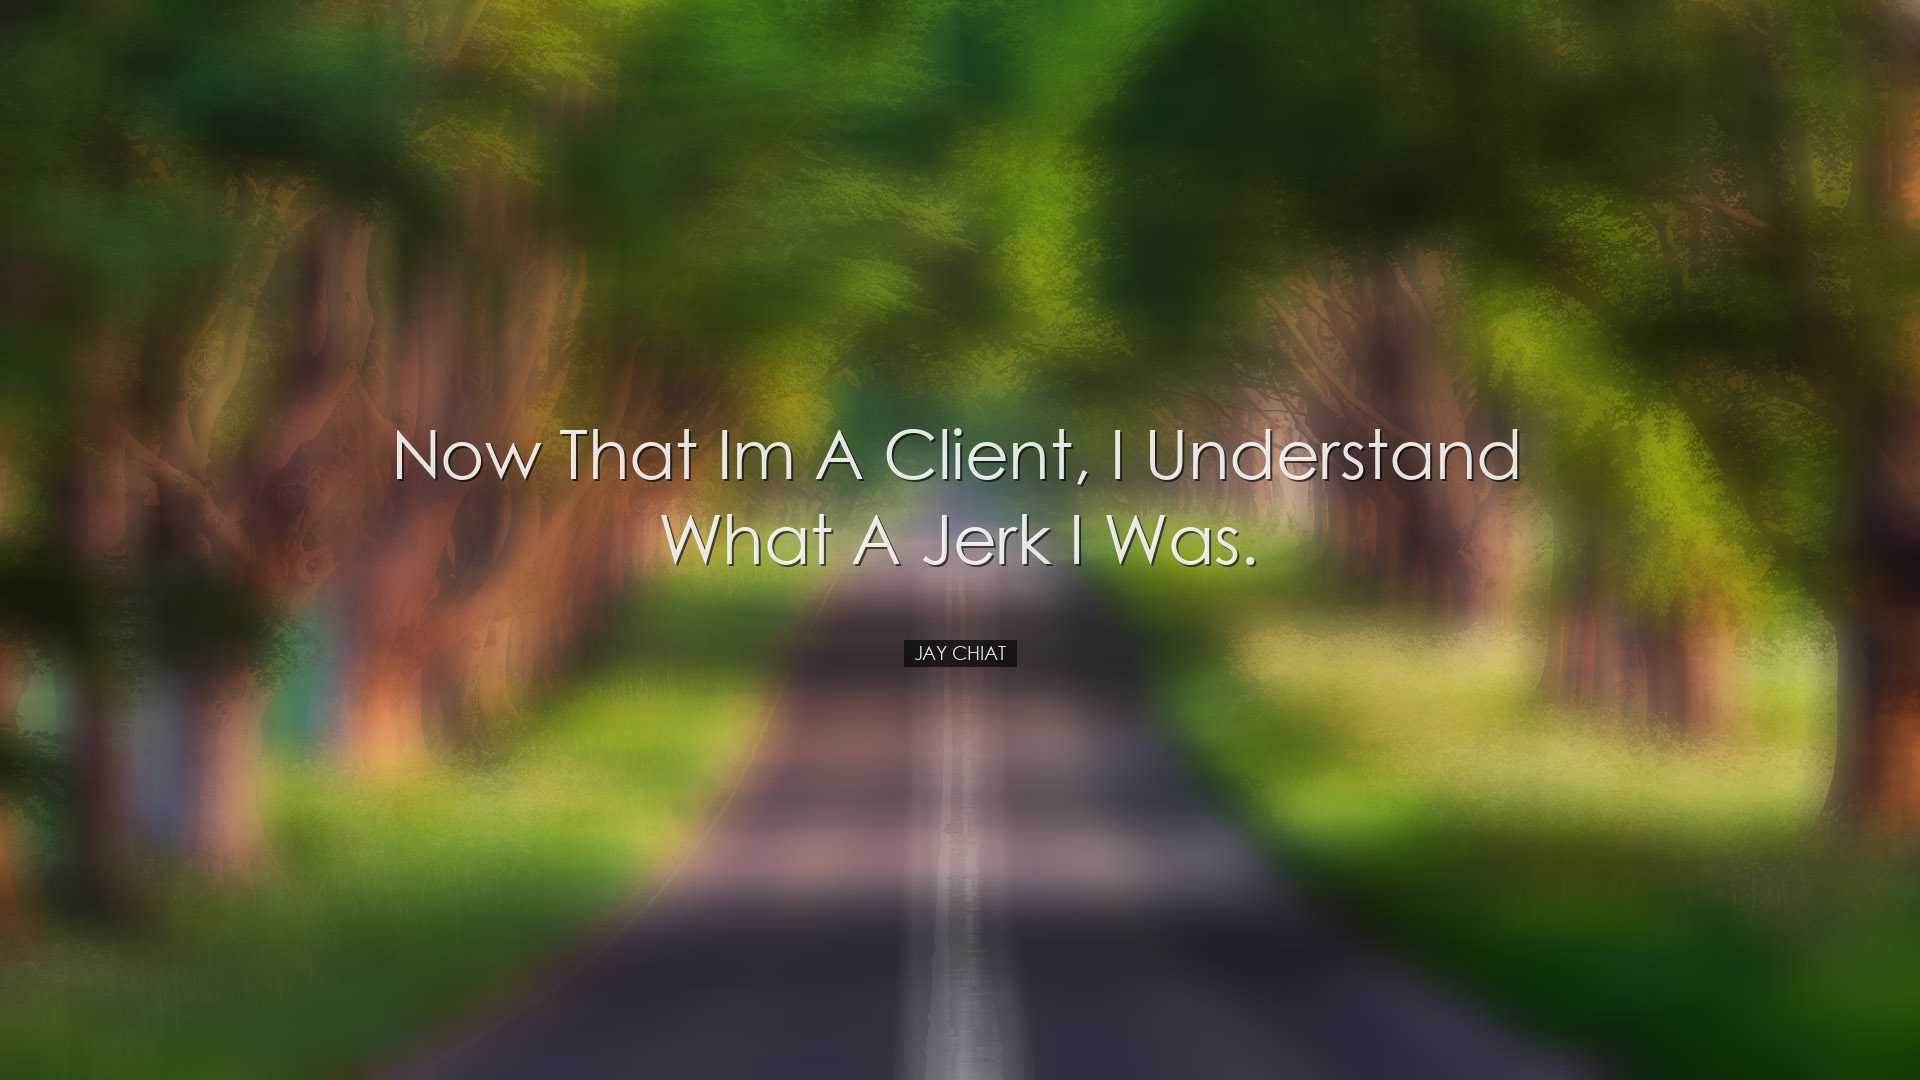 Now that Im a client, I understand what a jerk I was. - Jay Chiat